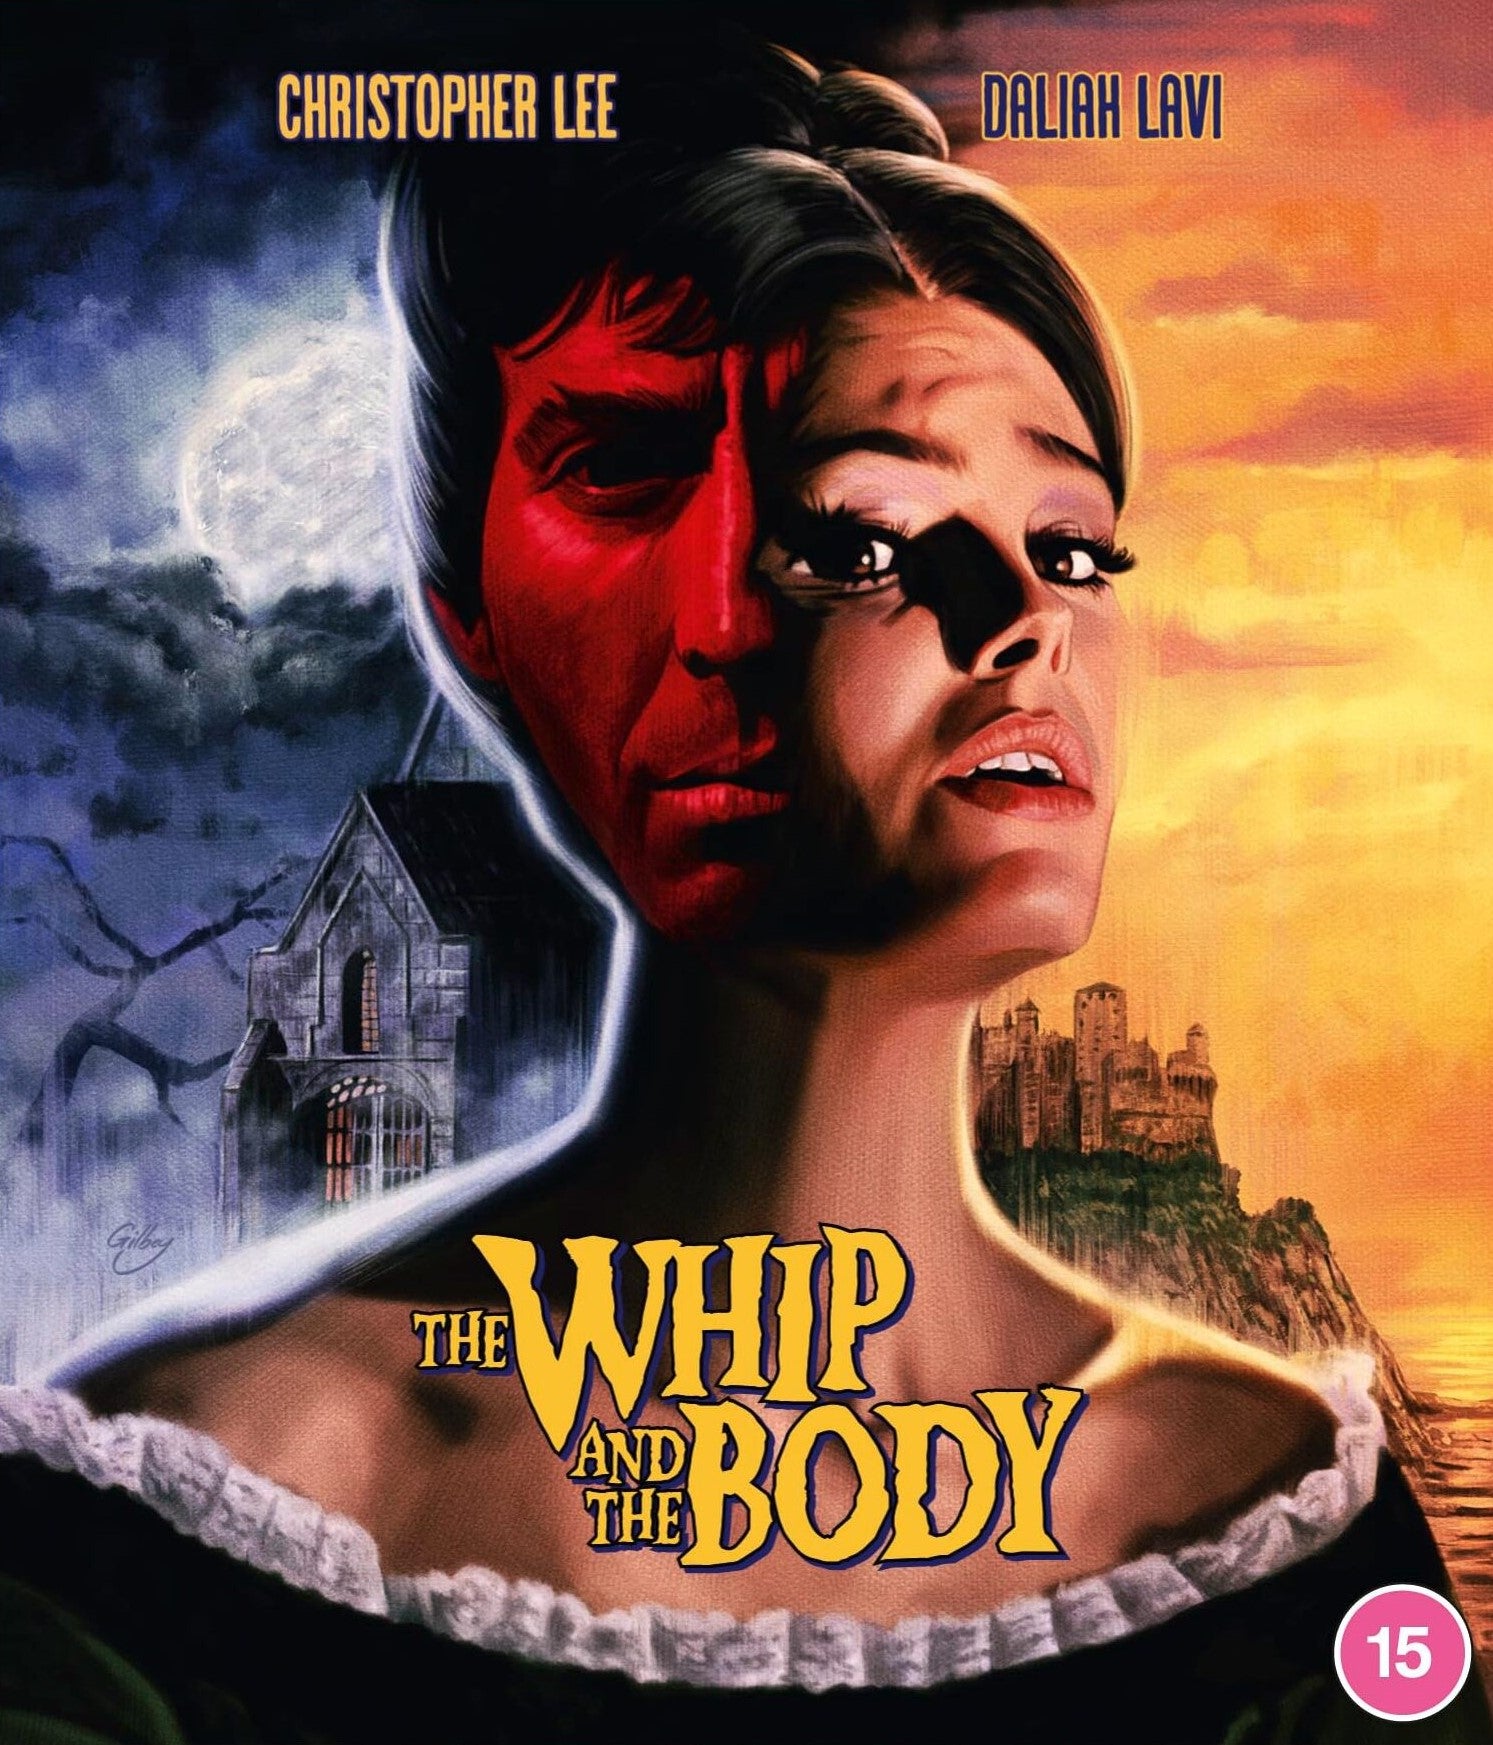 THE WHIP AND THE BODY (REGION B IMPORT) BLU-RAY